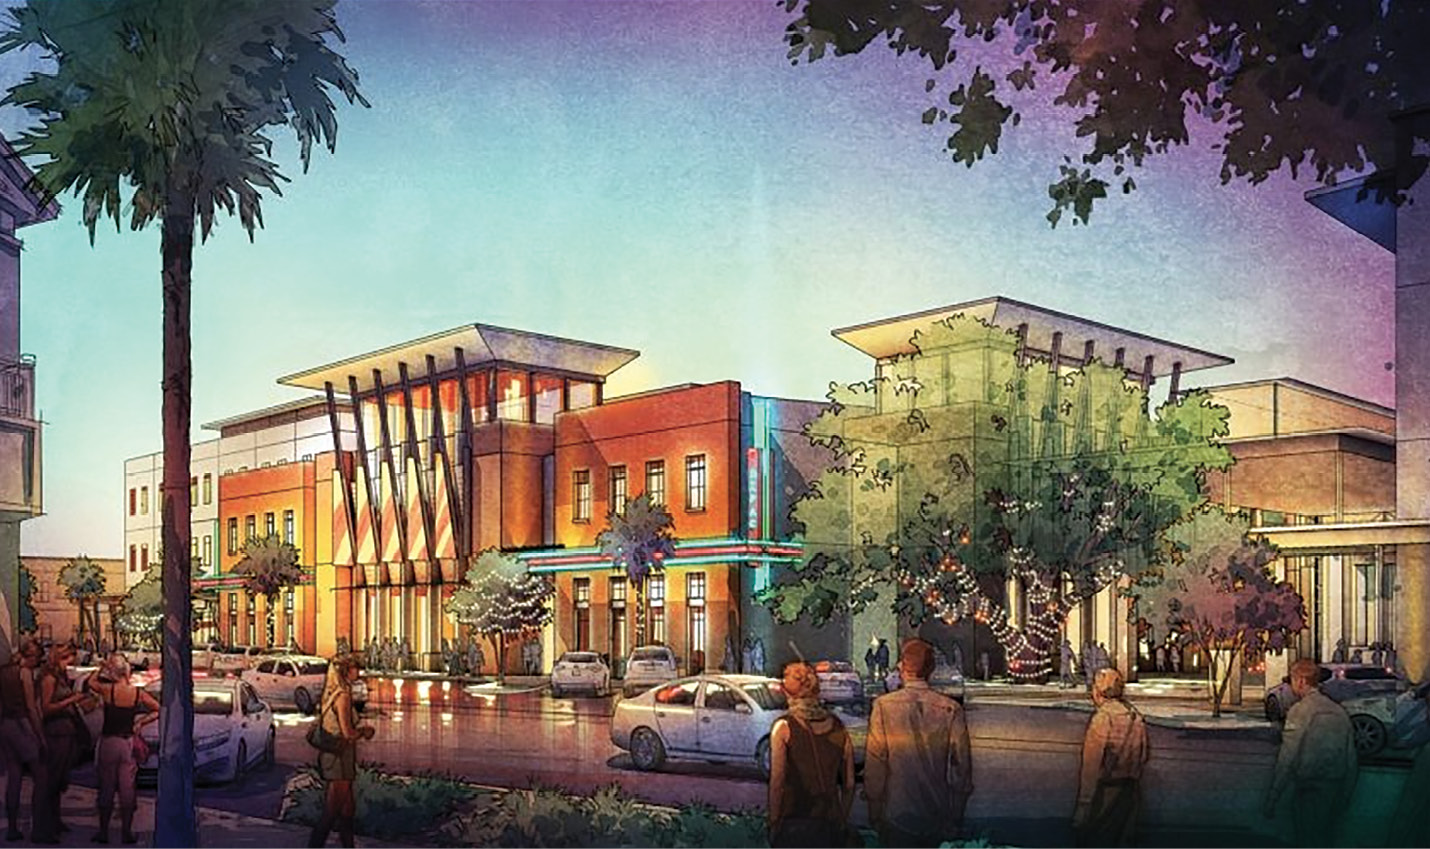 Stage Prep: An artist’s rendering of the proposed Daniel Island Performing Arts Center illustrates the ambitious vision for a mid-sized 600-seat theater...